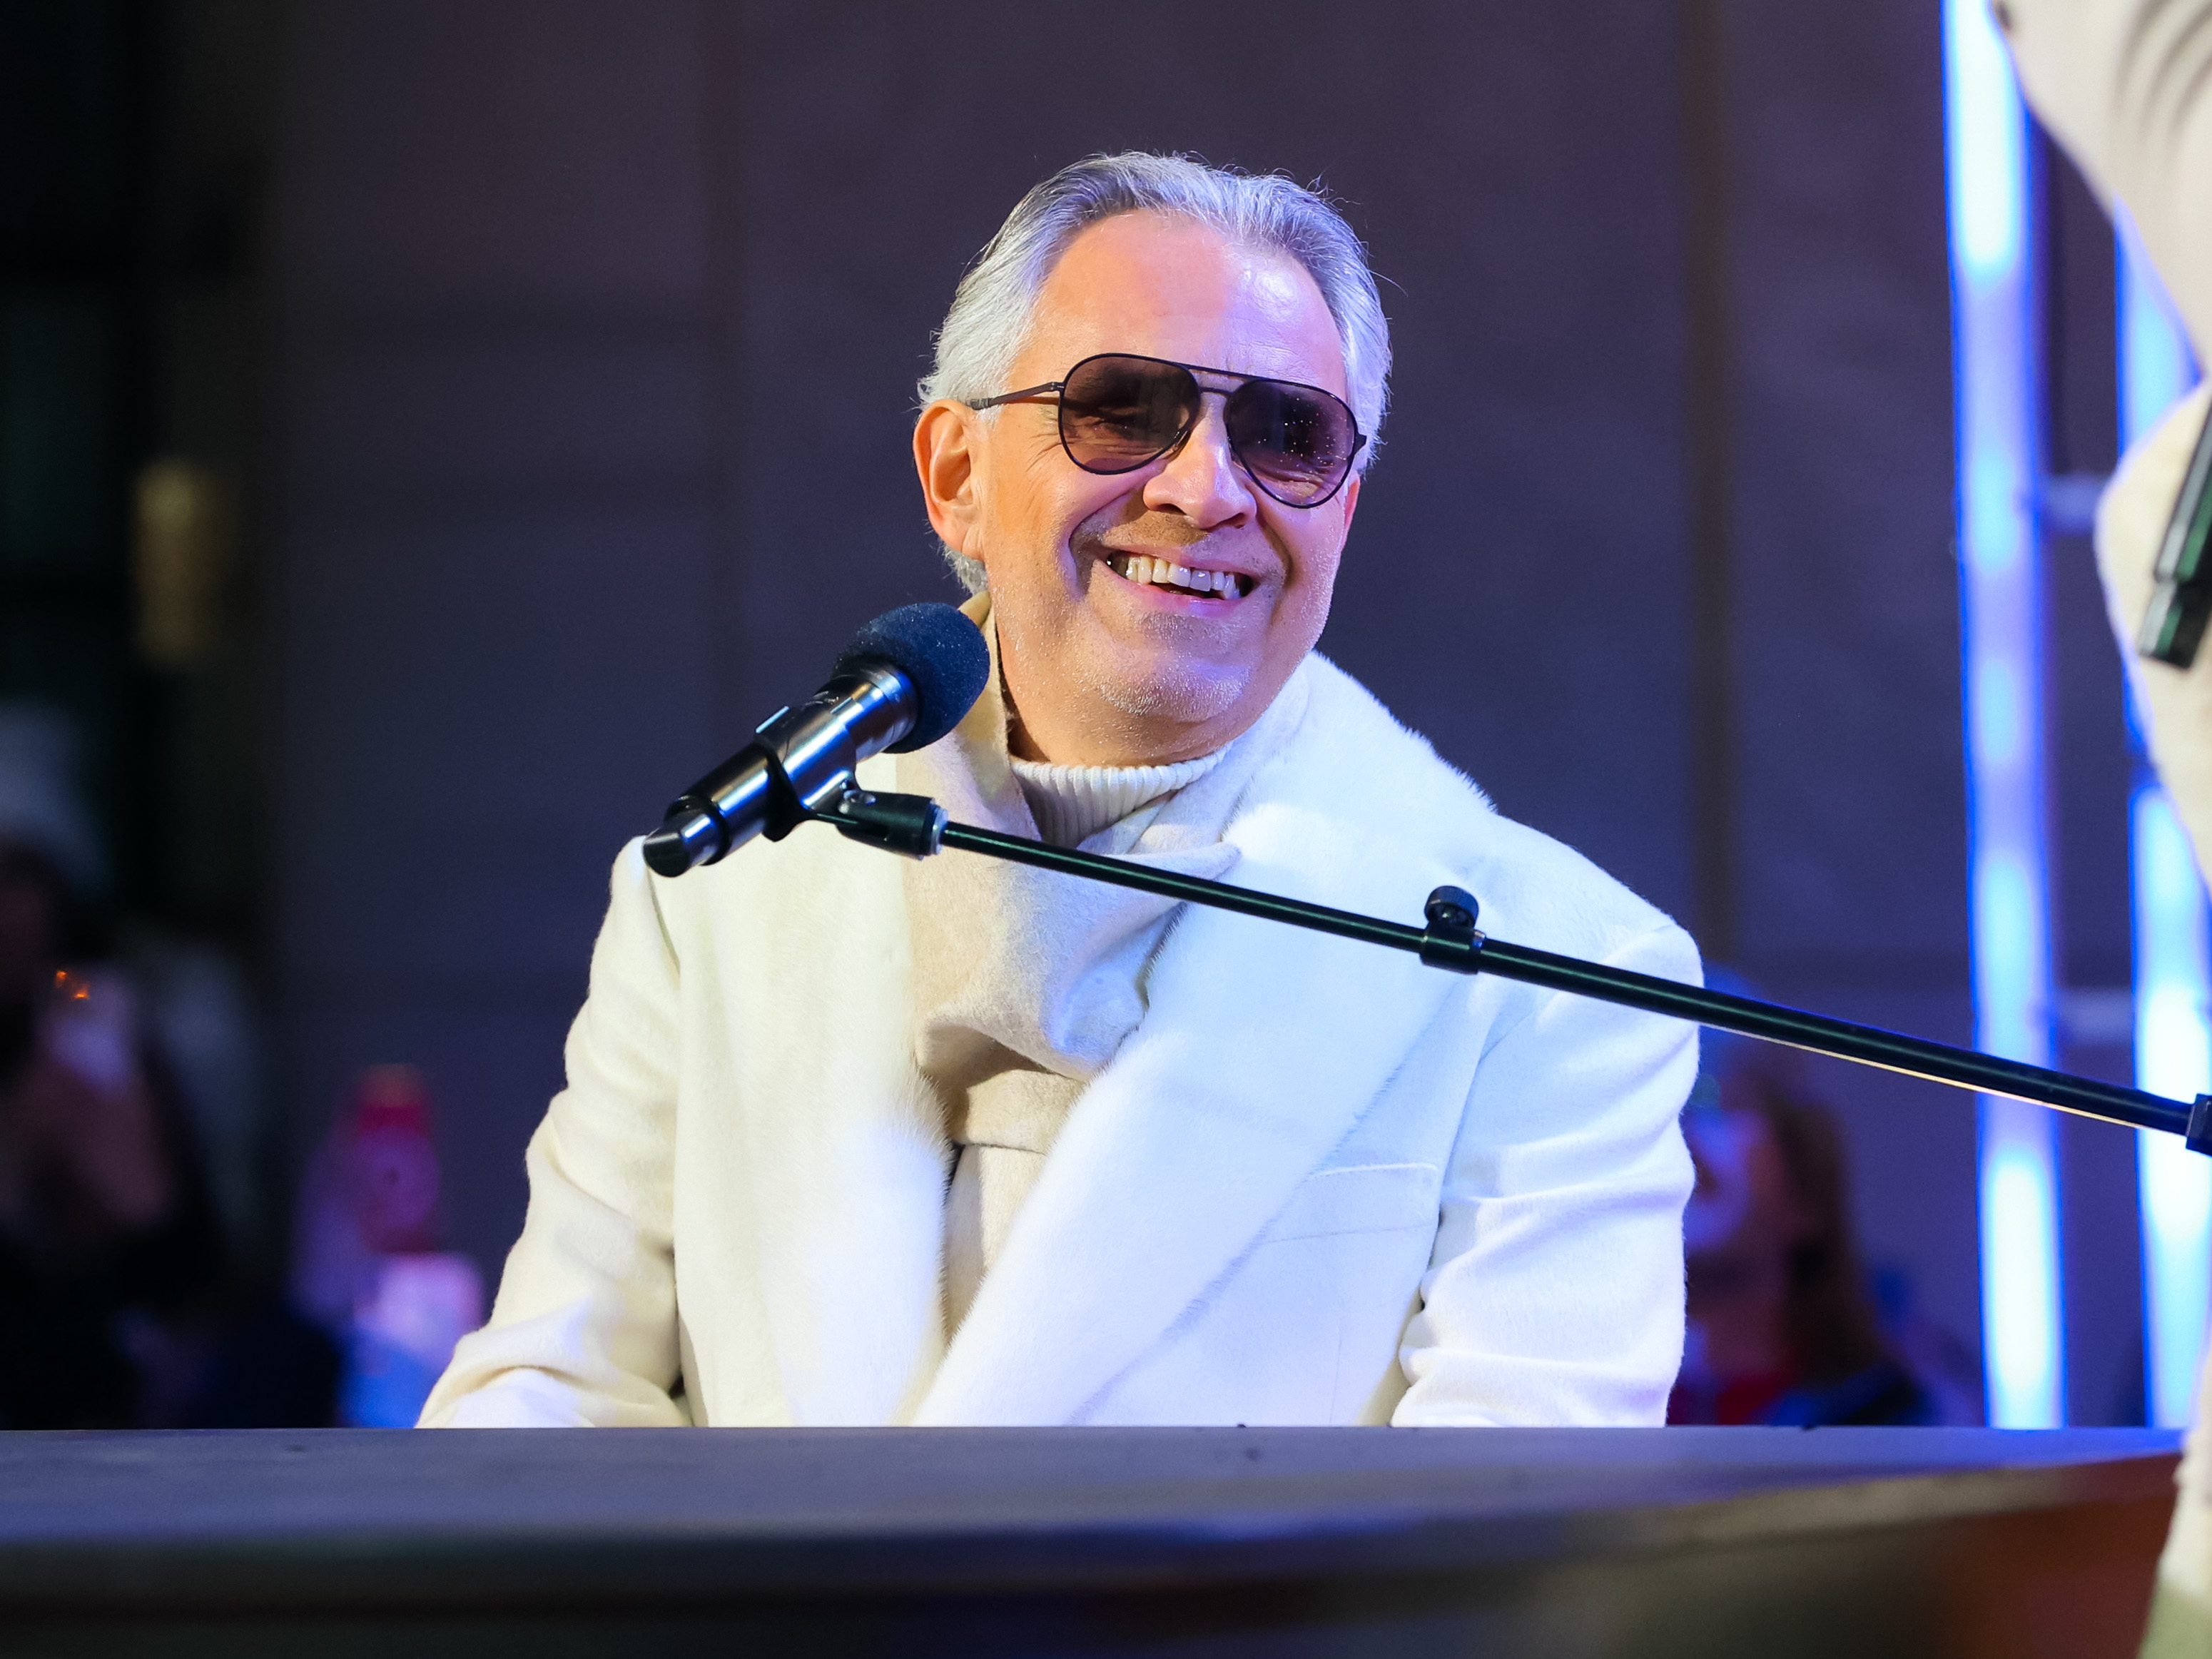 Andrea Bocelli's 3 Children: Everything to Know